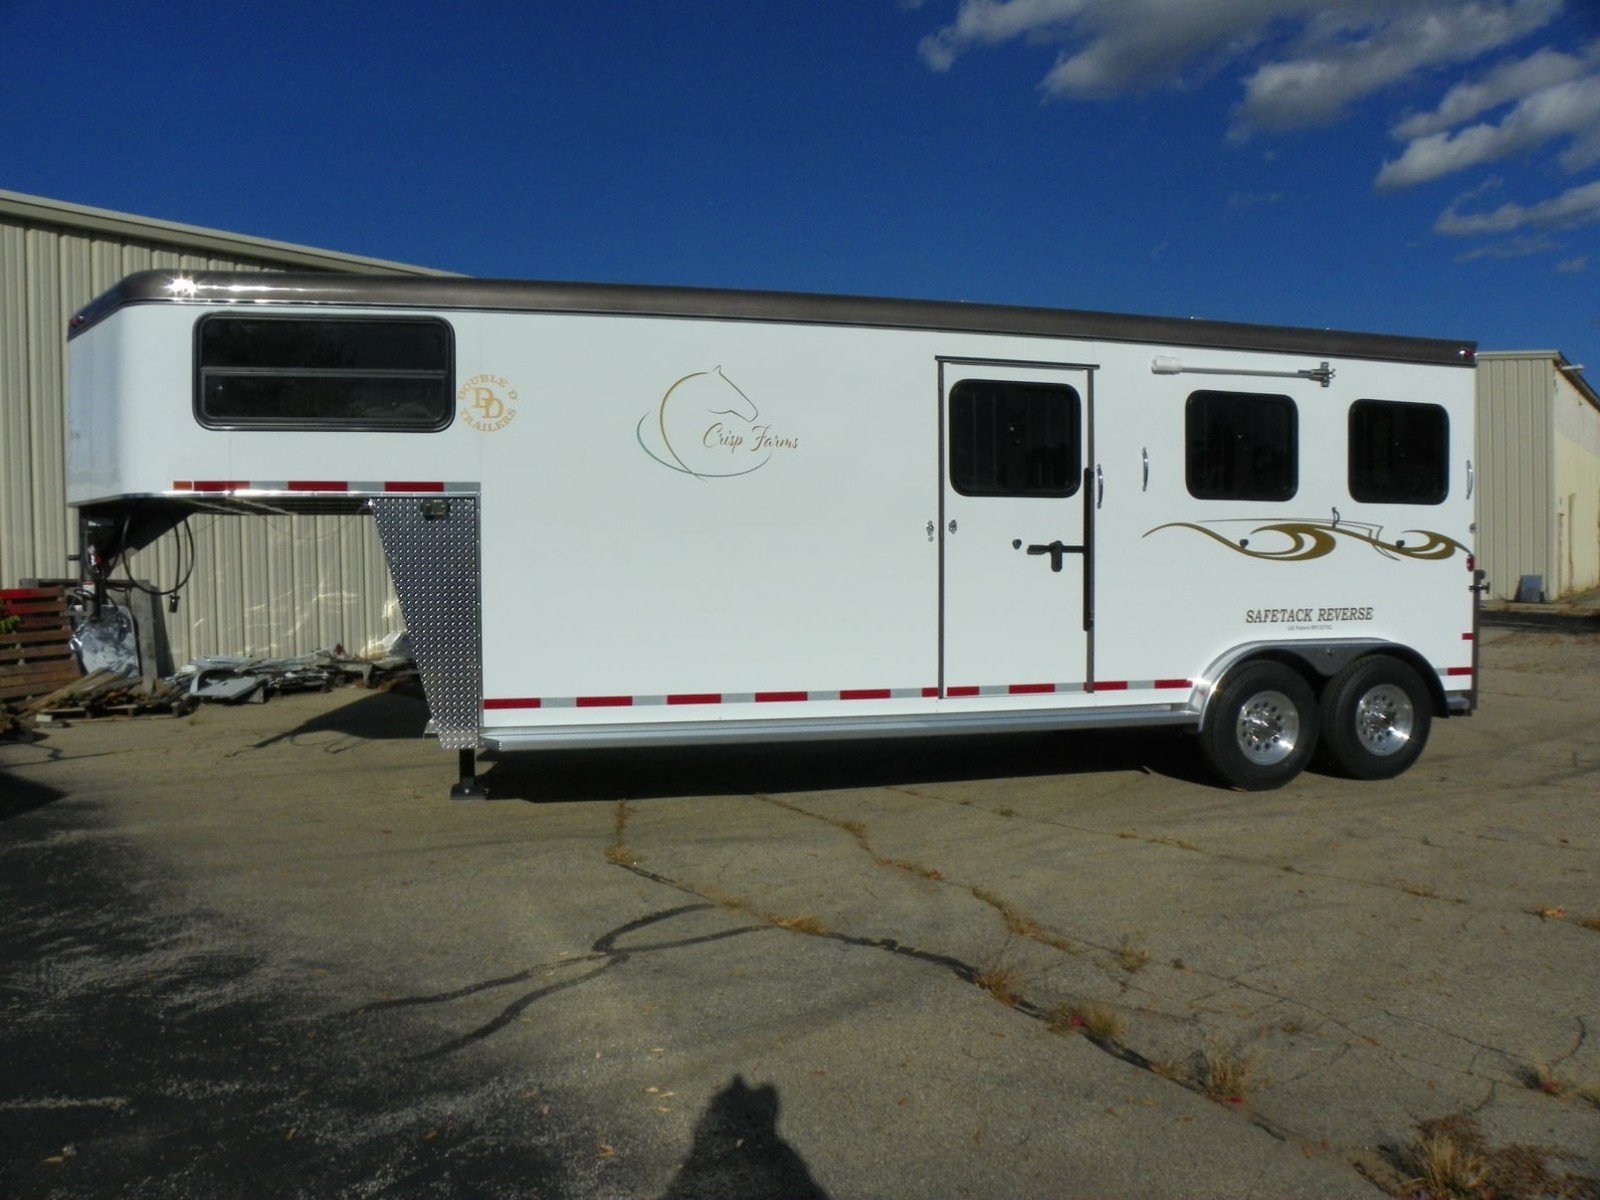 Basic Living Quarters Horse Trailer - The Basic LQ from Double D Trailers